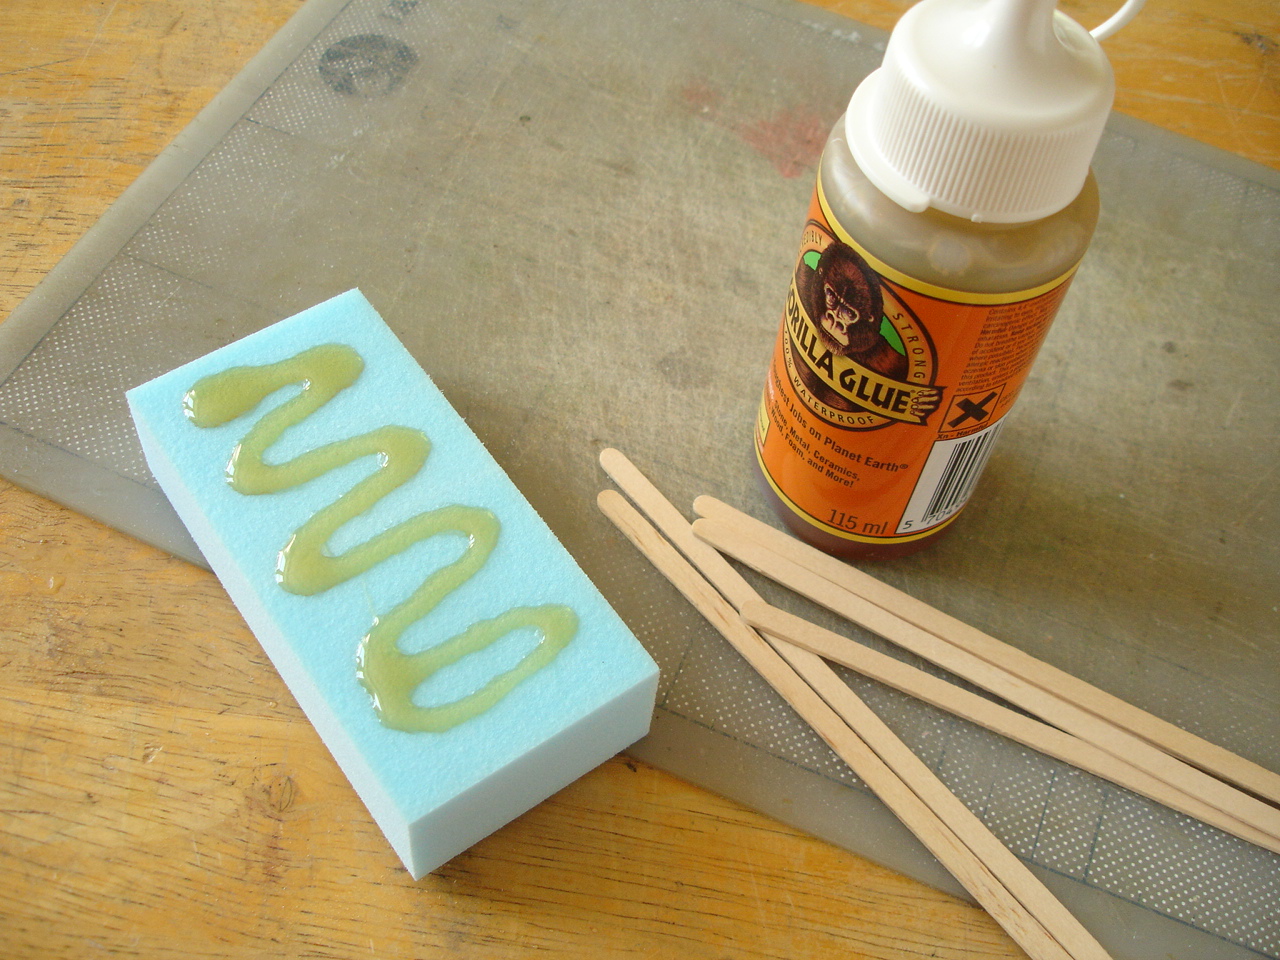 How To Glue Polystyrene Together